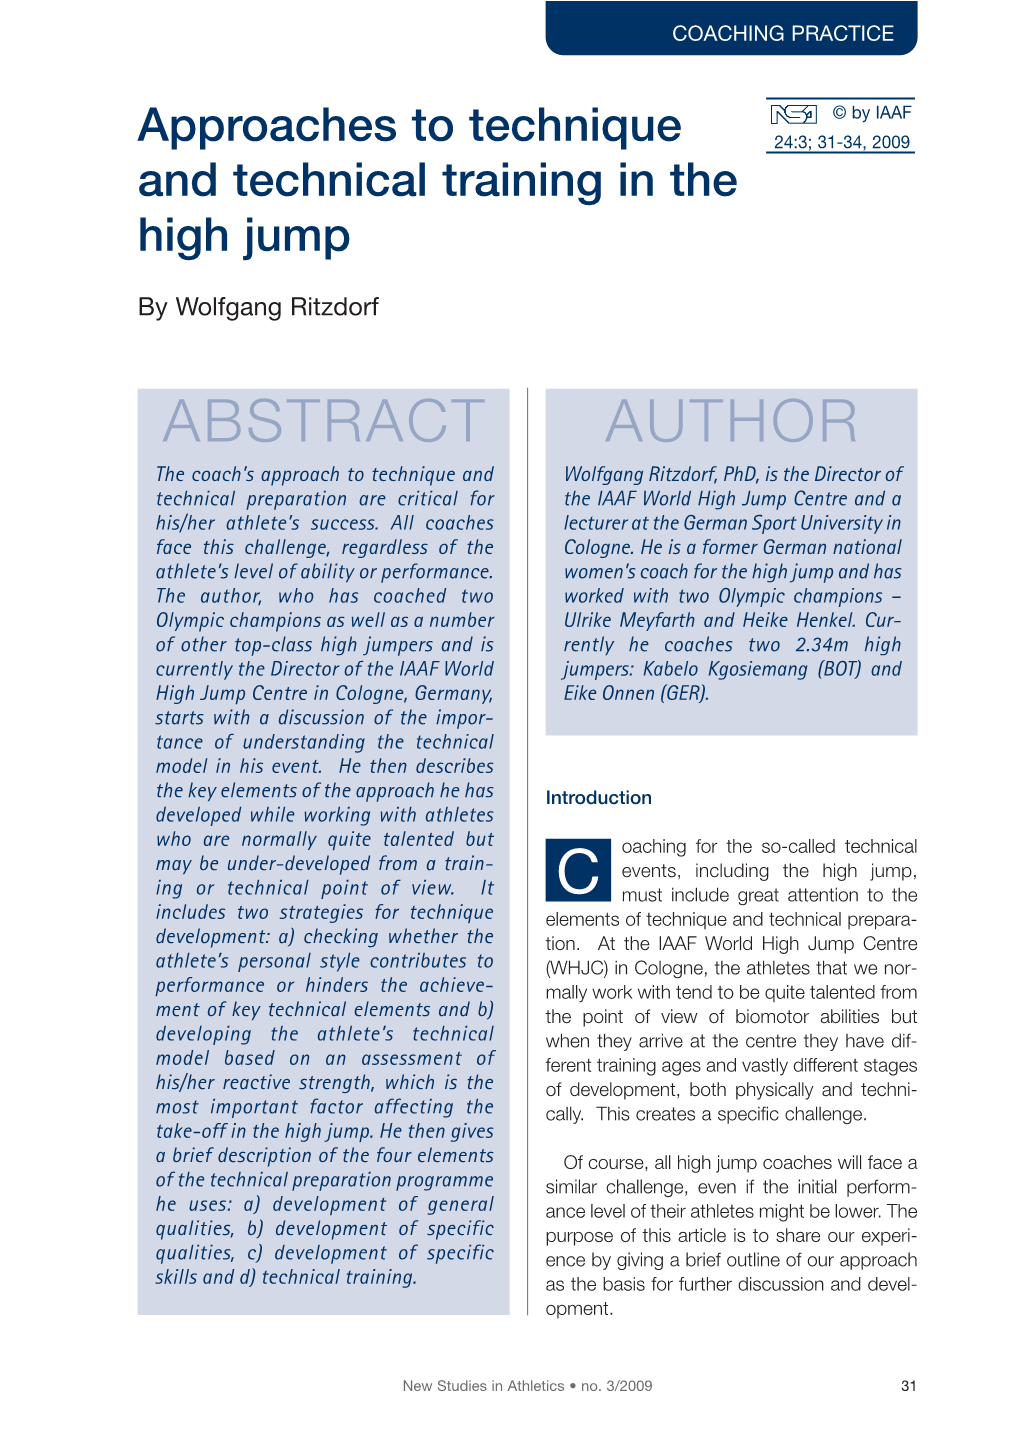 Approaches to Technique and Technical Training in the High Jump